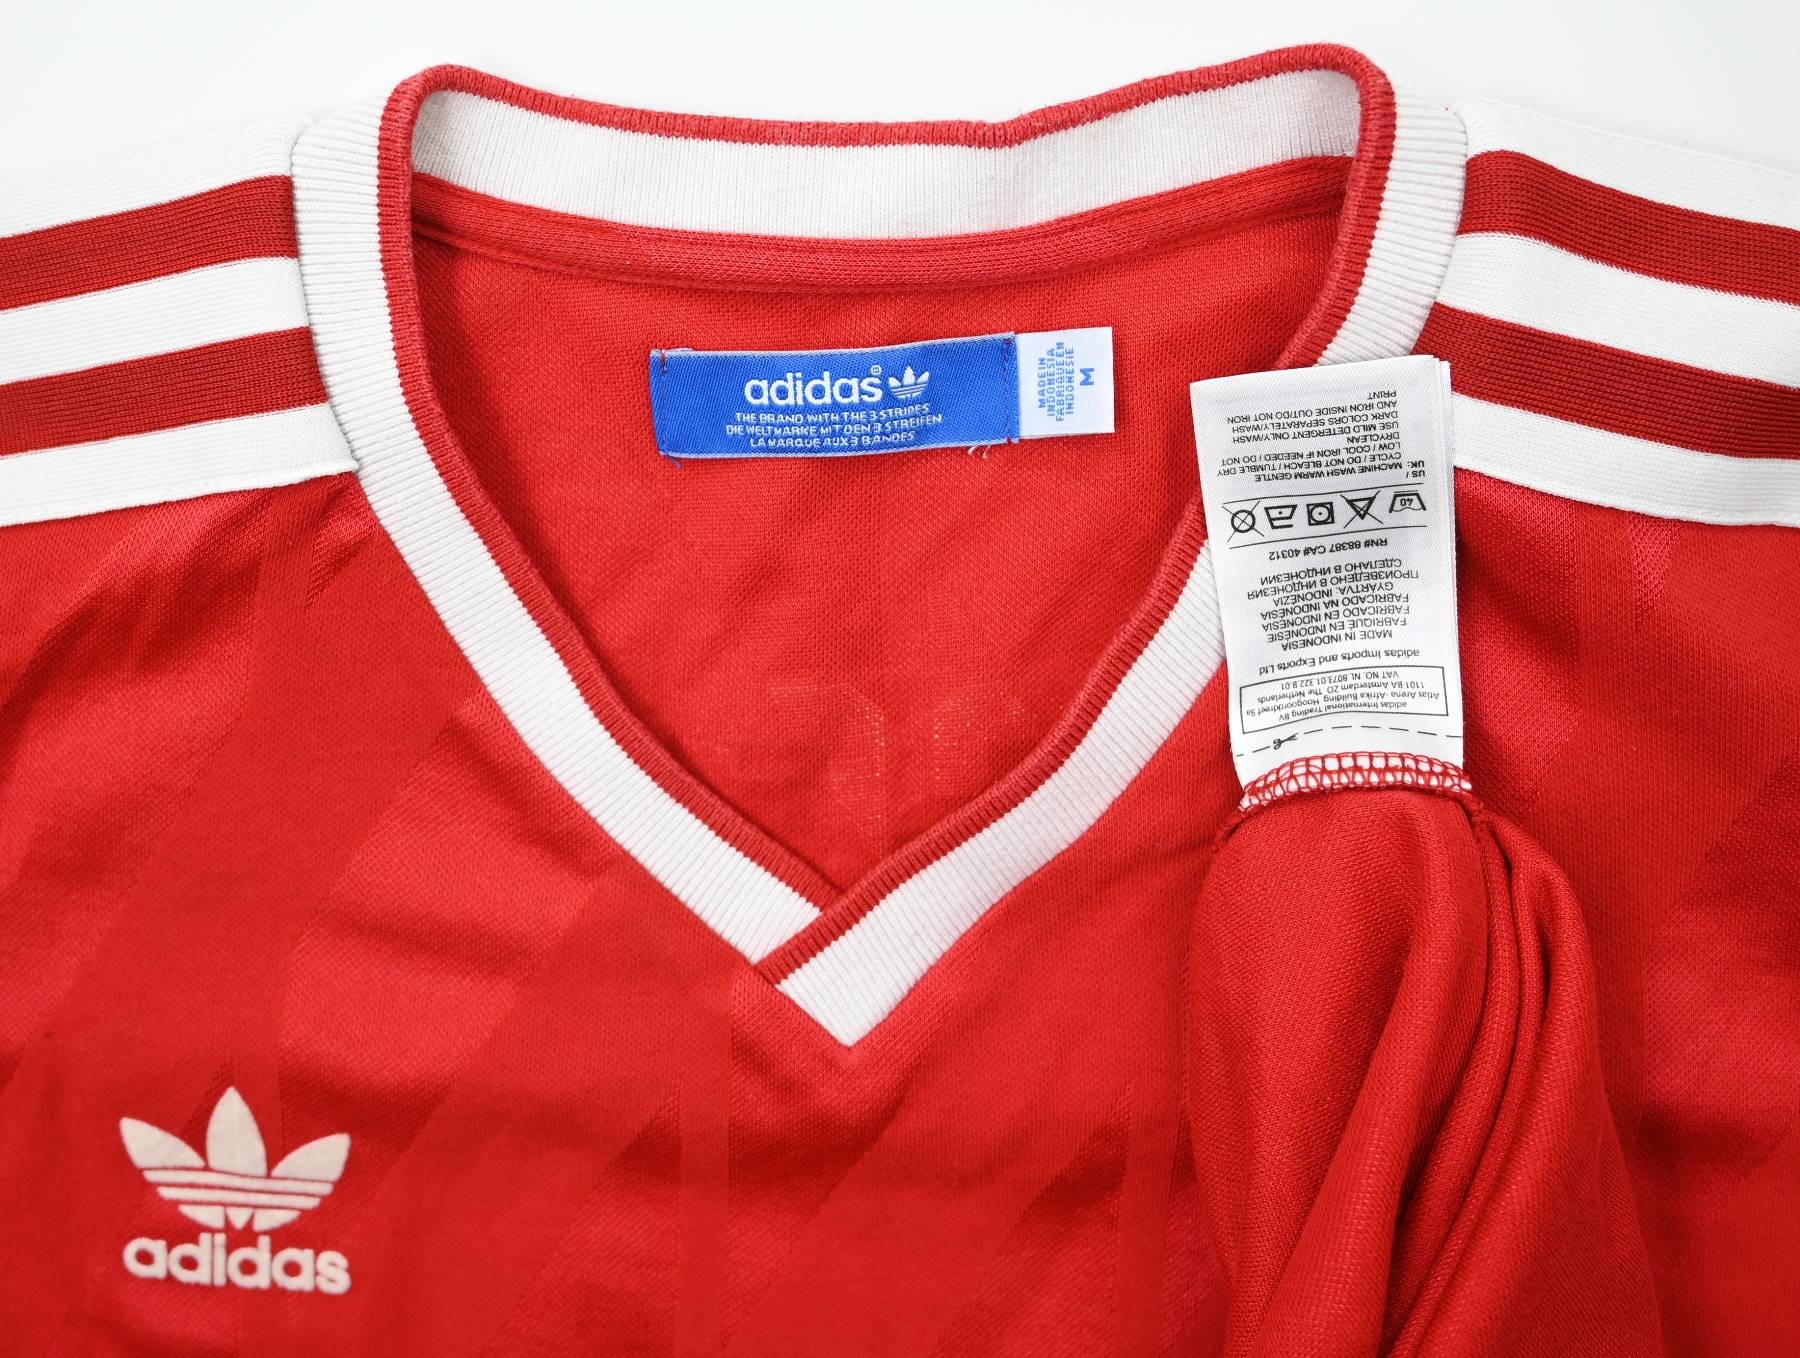 ADIDAS OLDSCHOOL SHIRT M Other Shirts \ Vintage New in | Classic-Shirts.com